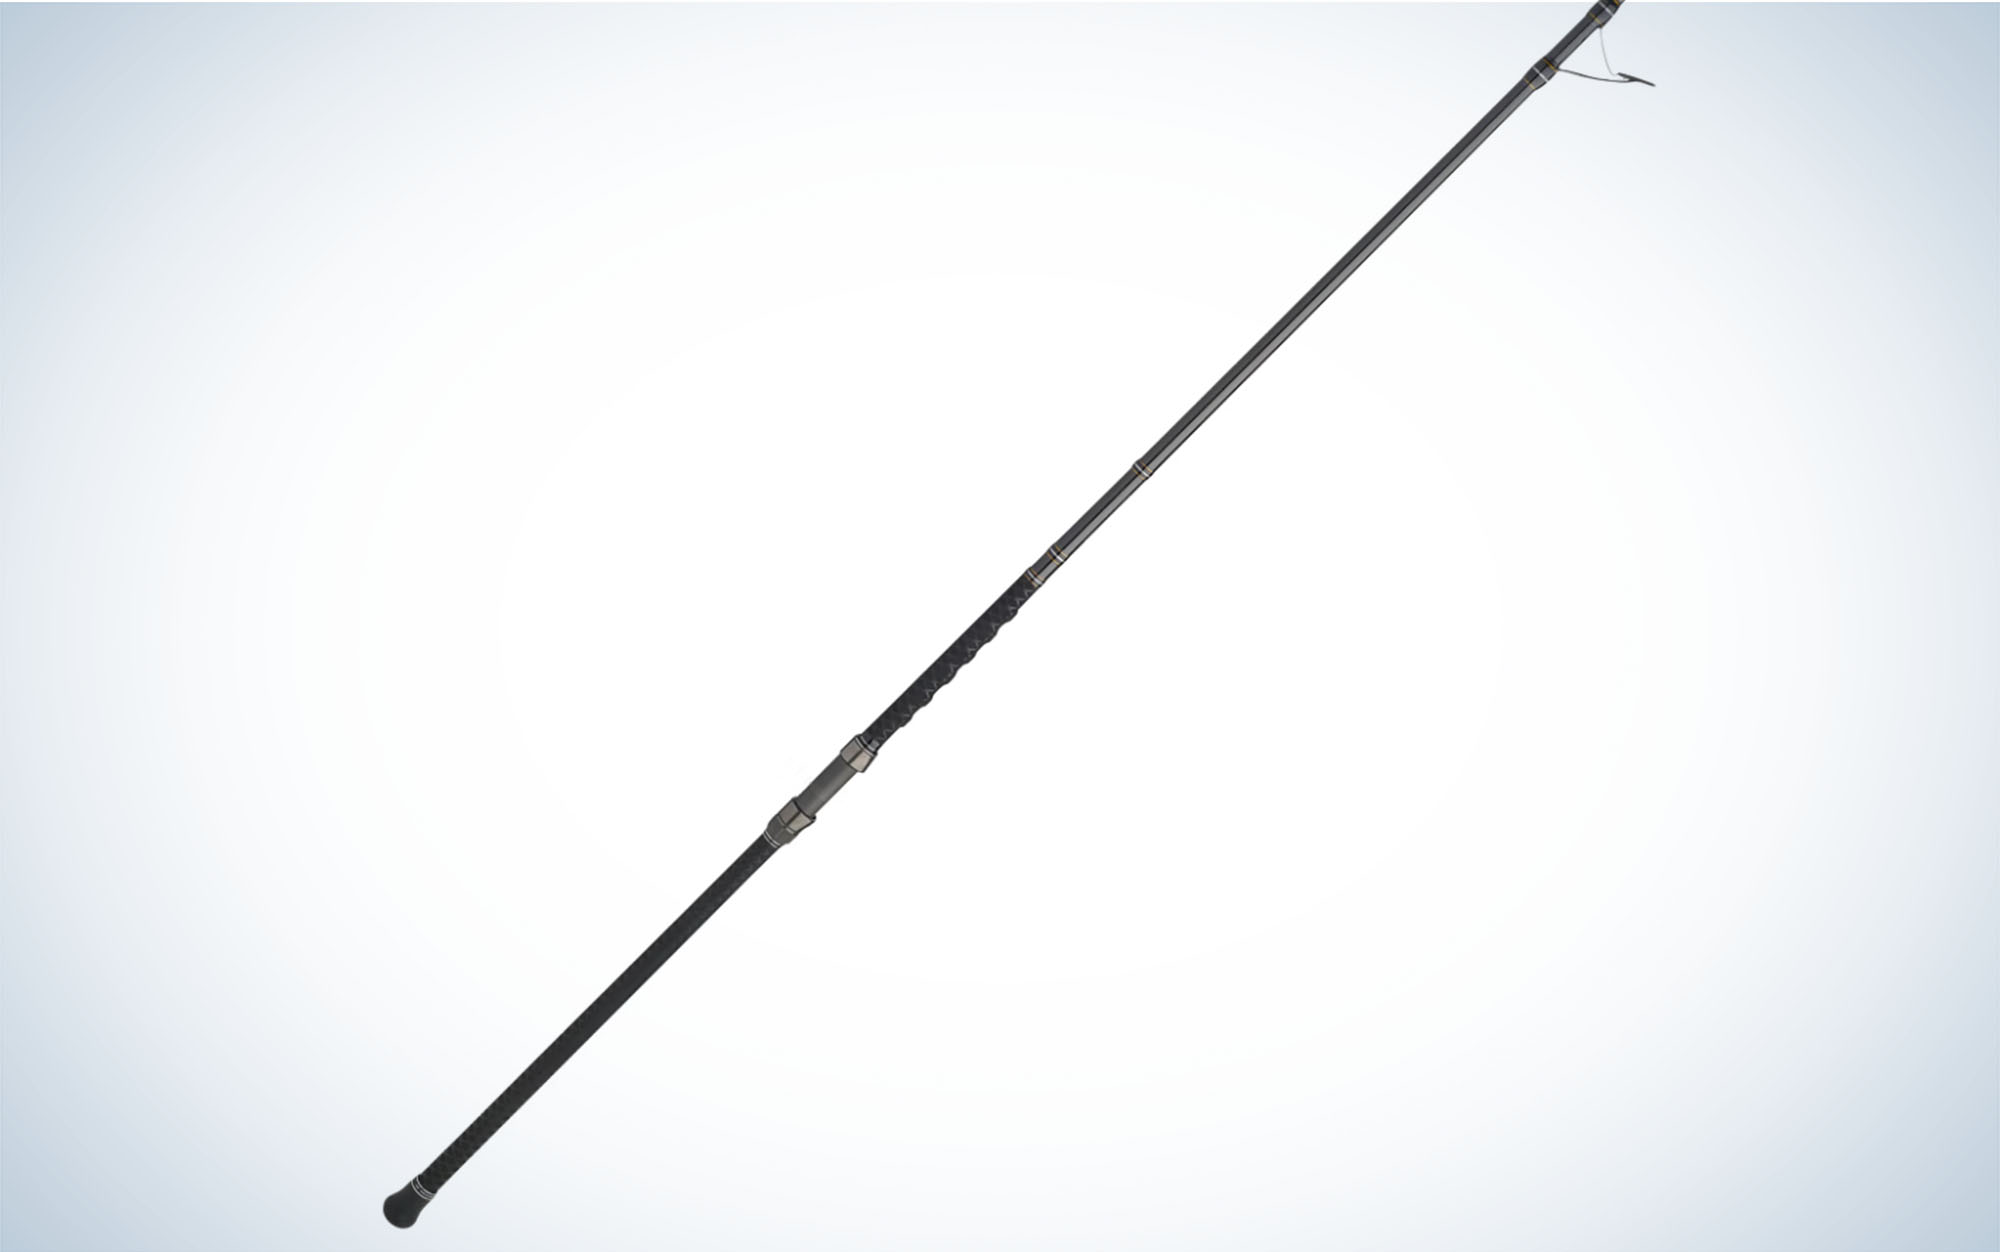 The Ultimate Fishing Rod Guide: Types, Characteristics, Advantages